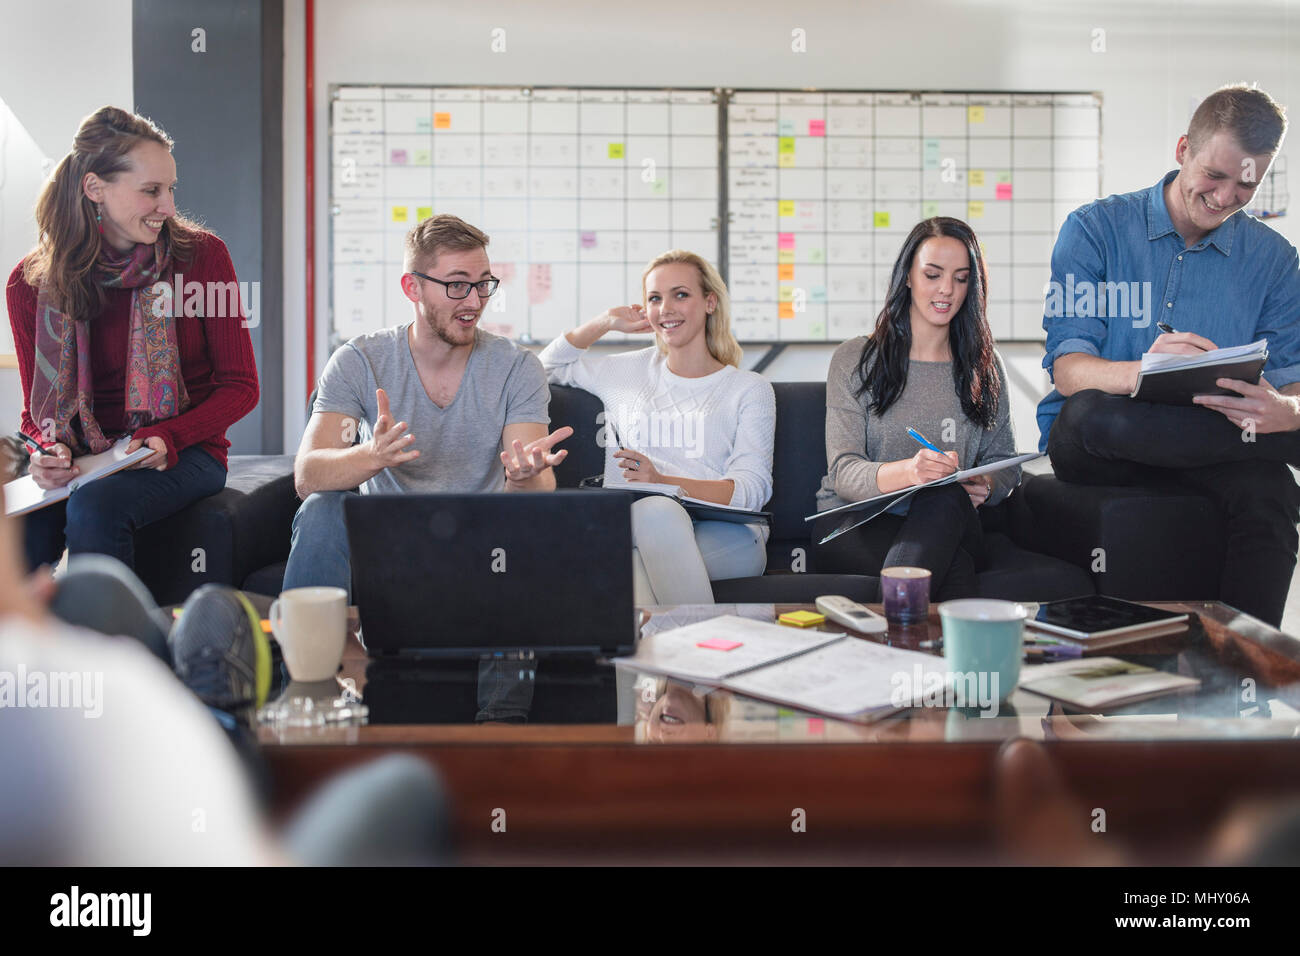 Male and female colleagues having brainstorming meeting in office Stock Photo